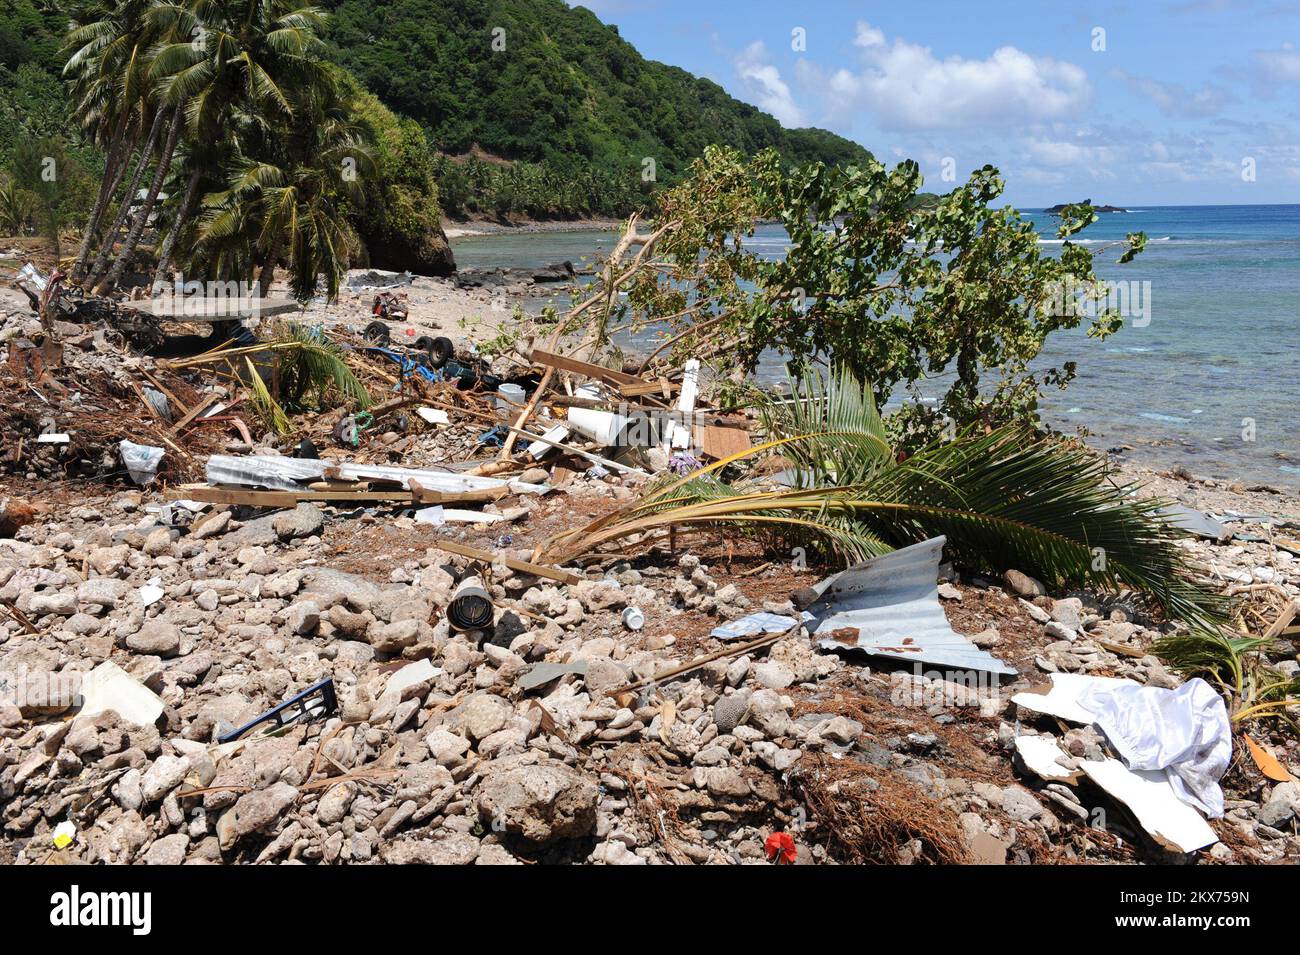 Earthquake   Tsunami - Leone, American Samoa, October 2, 2009   Debris of every kind is spread across a beach following the recent tsunami in American Samoa.. American Samoa Earthquake, Tsunami, and Flooding. Photographs Relating to Disasters and Emergency Management Programs, Activities, and Officials Stock Photo